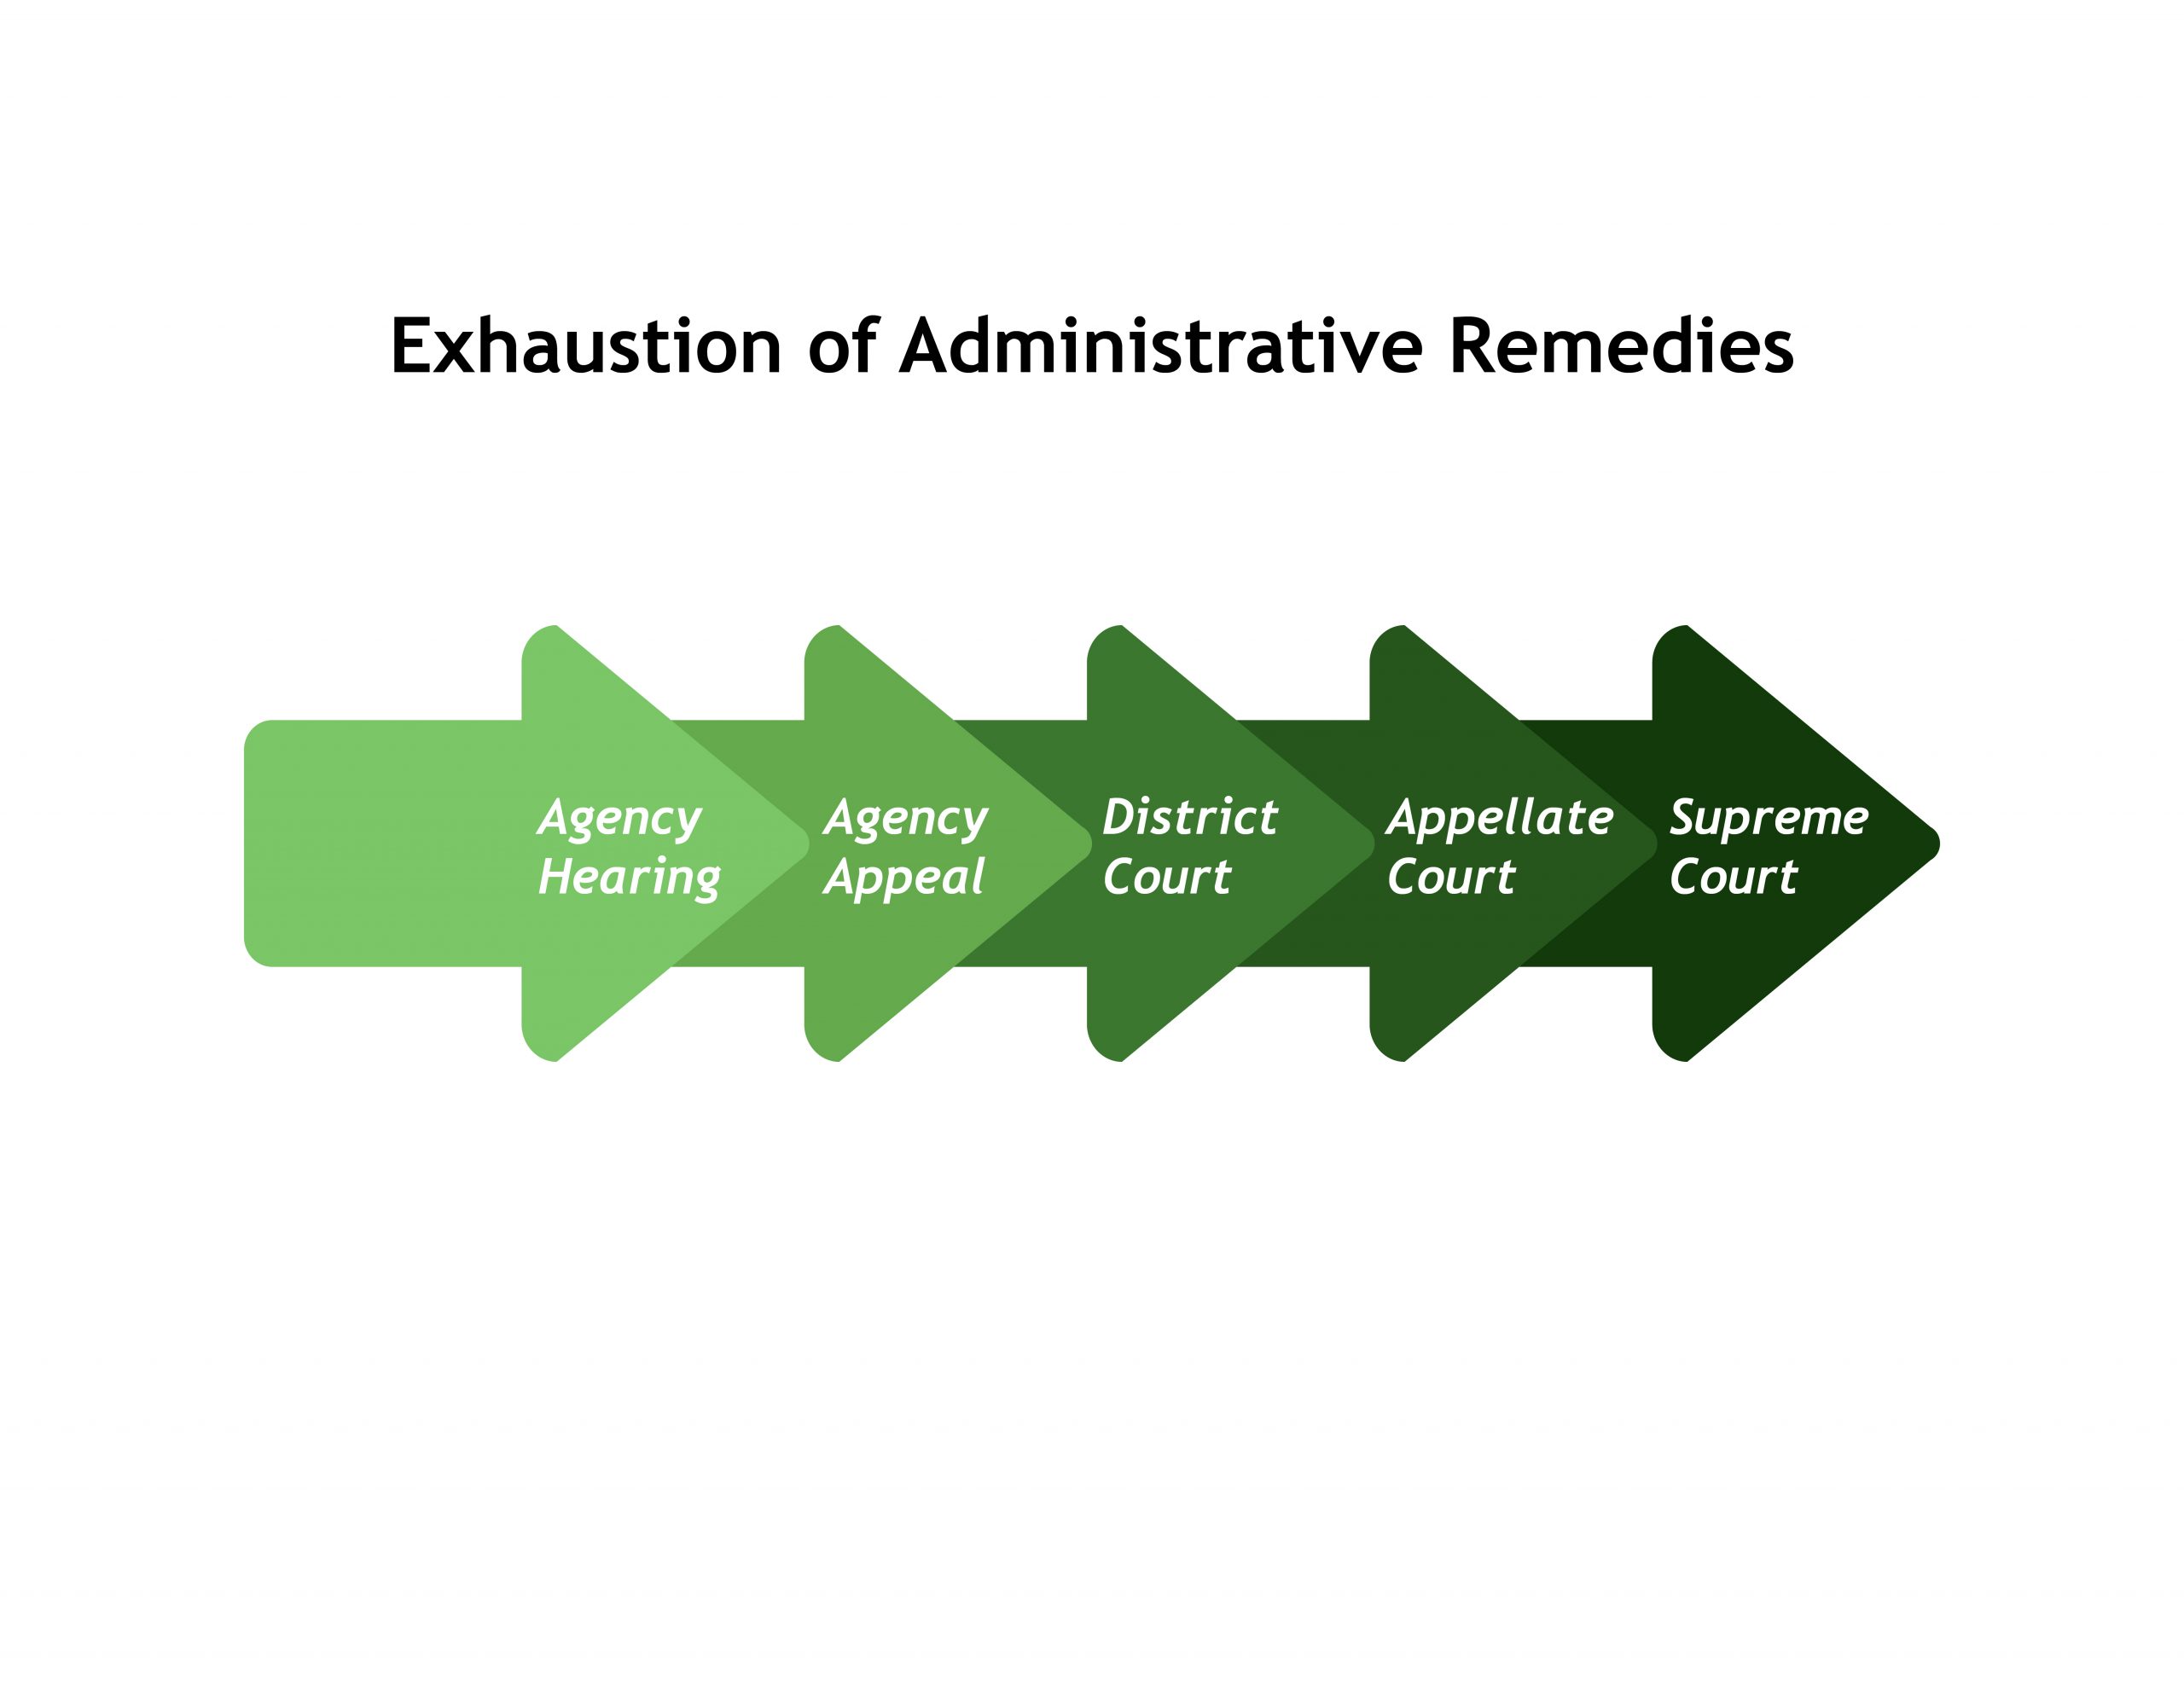 Graphic showing required steps in exhaustion of administrative remedies